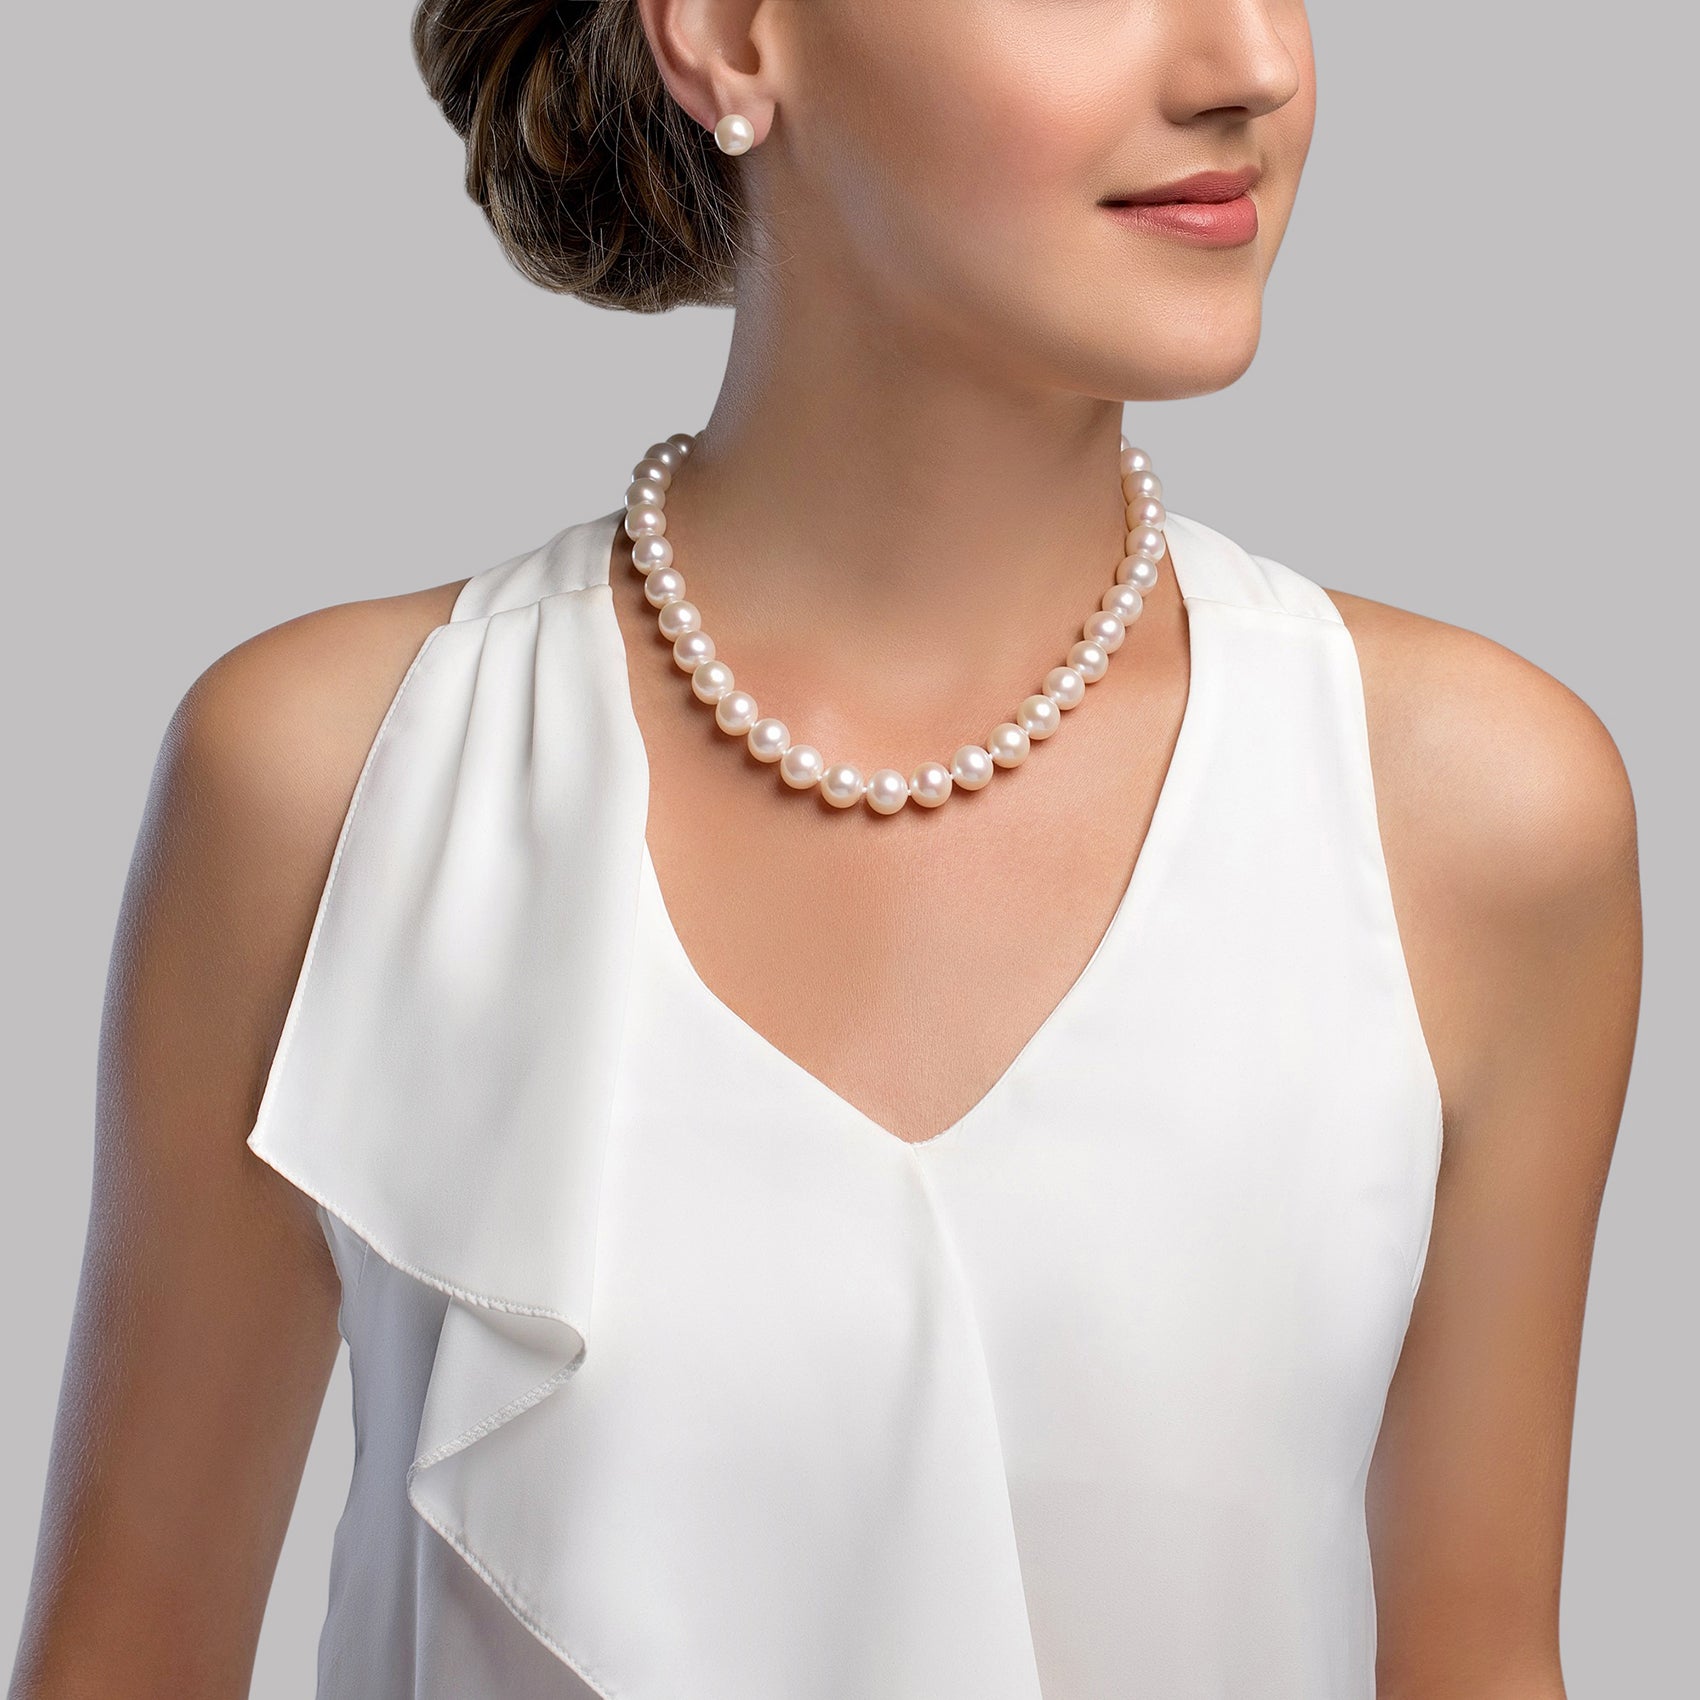 9.5-10.5mm White Freshwater Pearl Necklace - AAA Quality - Secondary Image